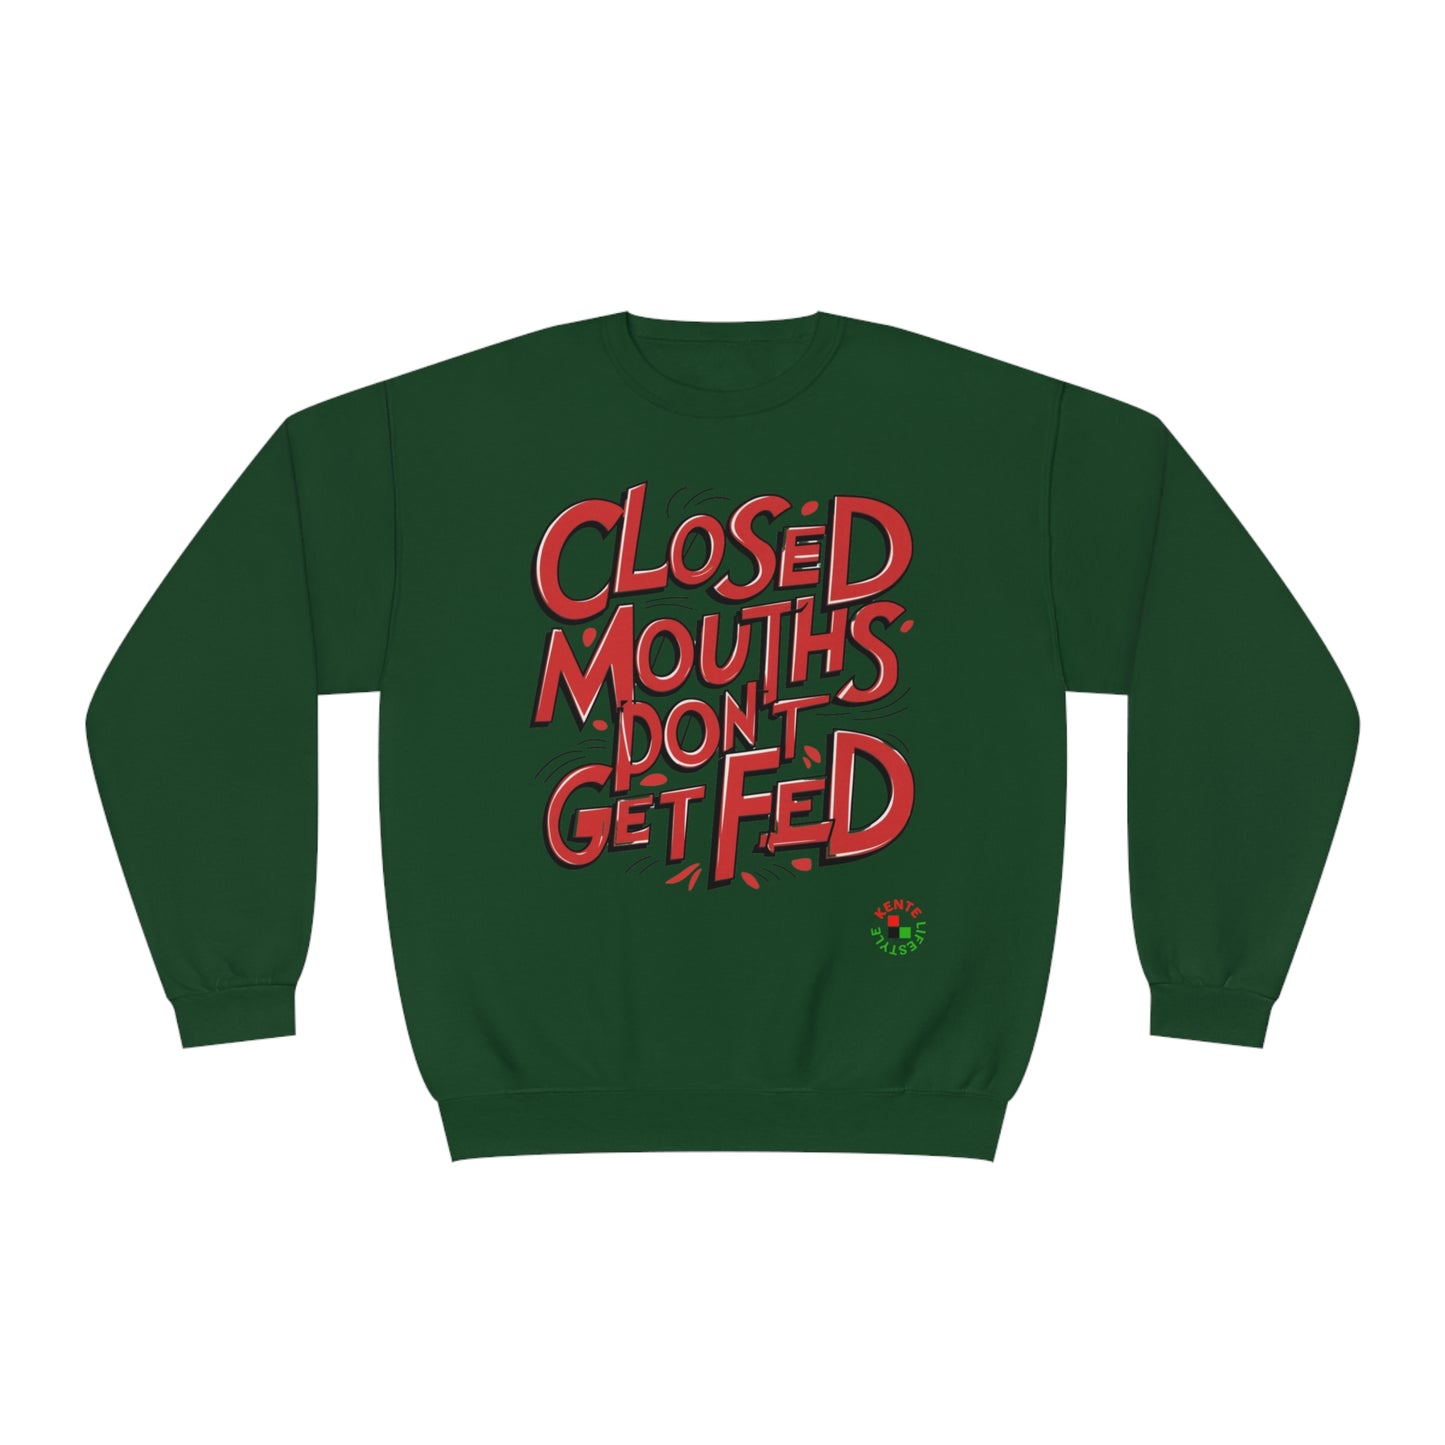 "Closed Mouths Don't Get Fed" - Sweatshirt